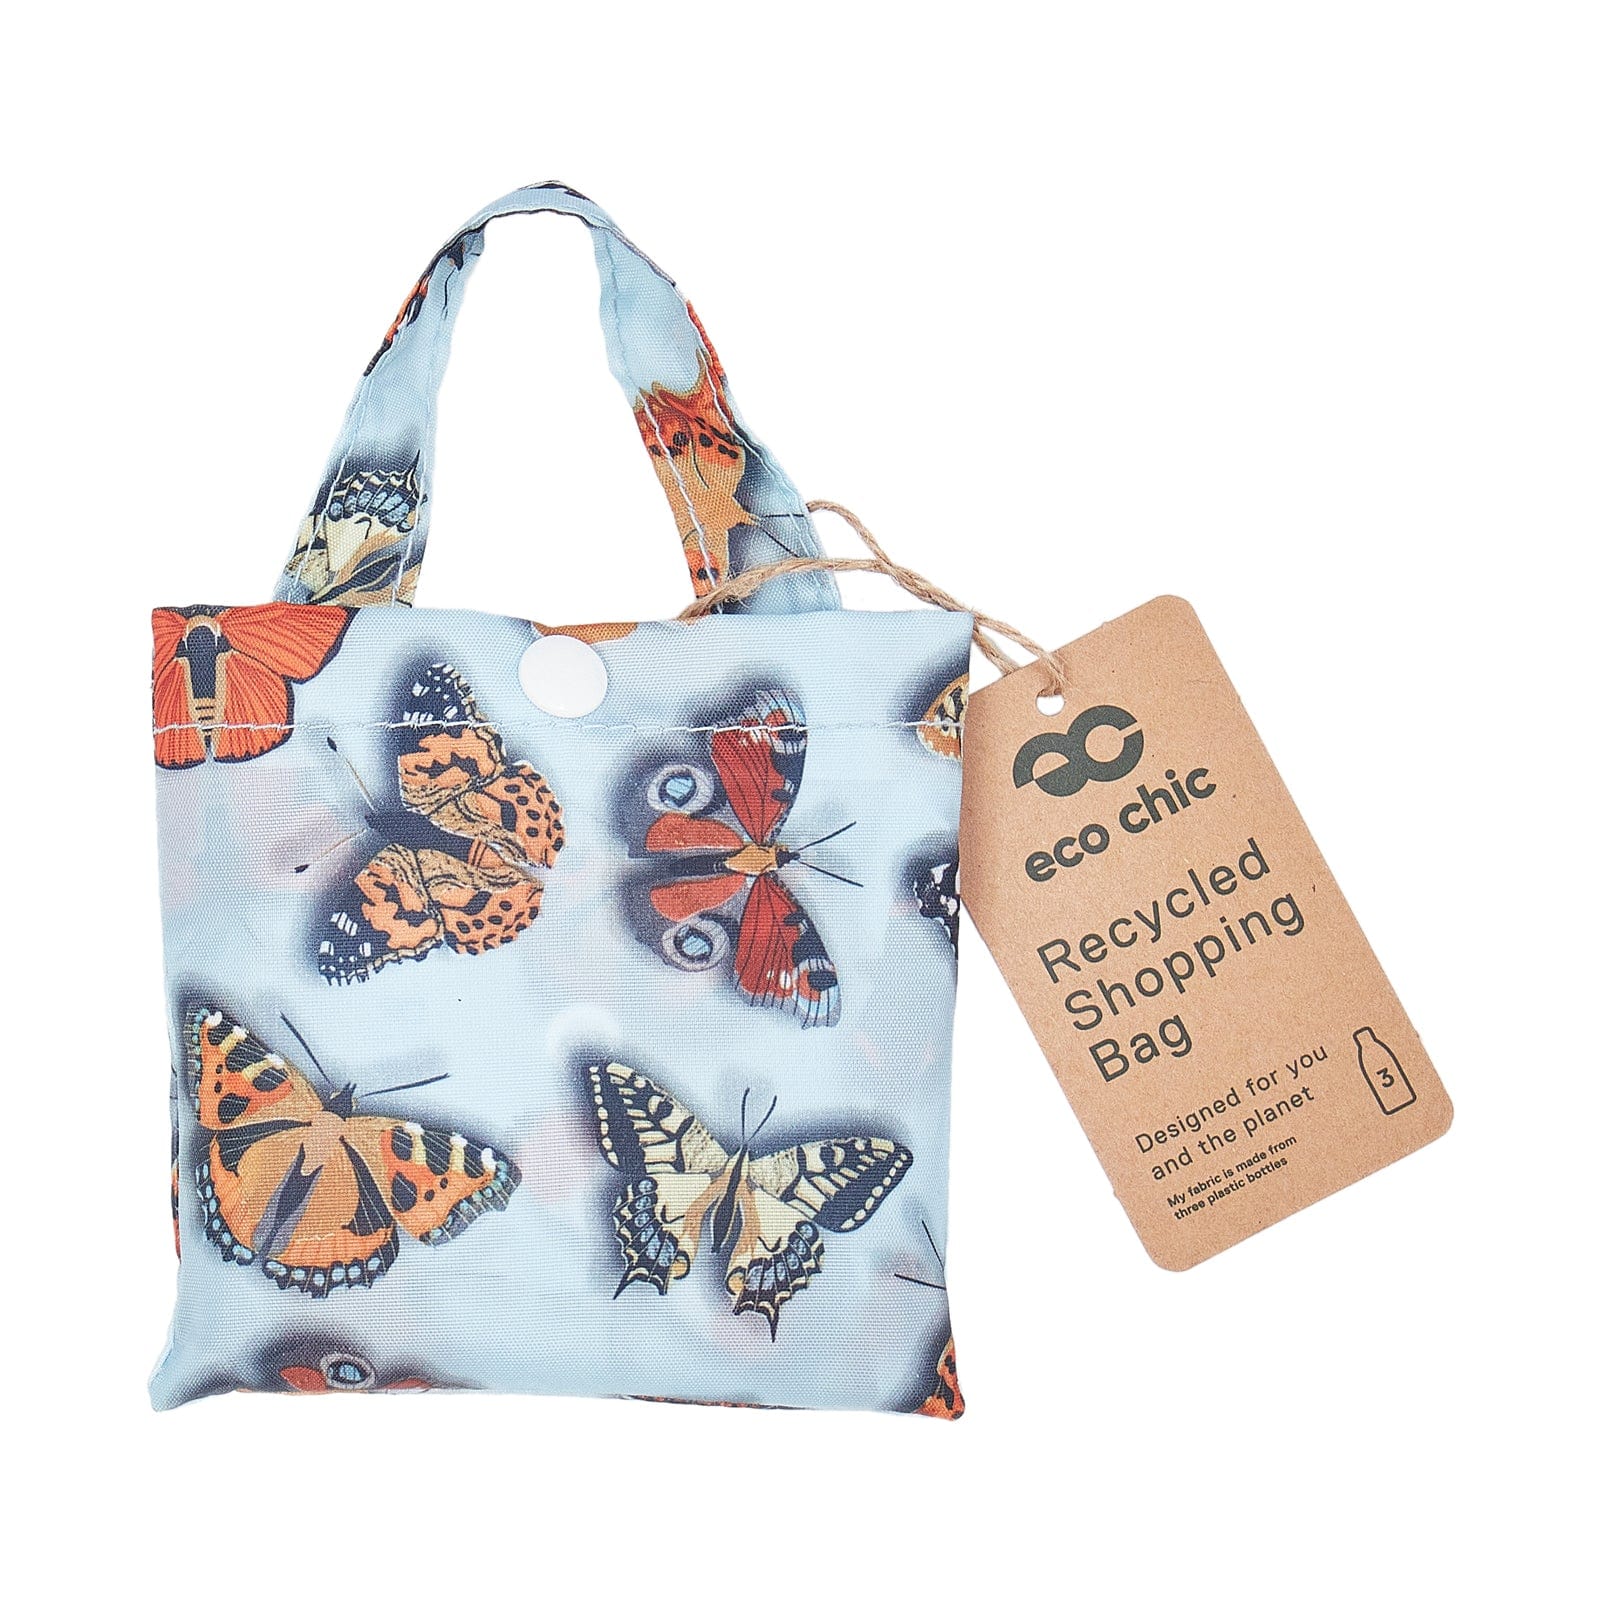 Eco Chic Eco Chic Lightweight Foldable Reusable Shopping Bag Wild Butterflies